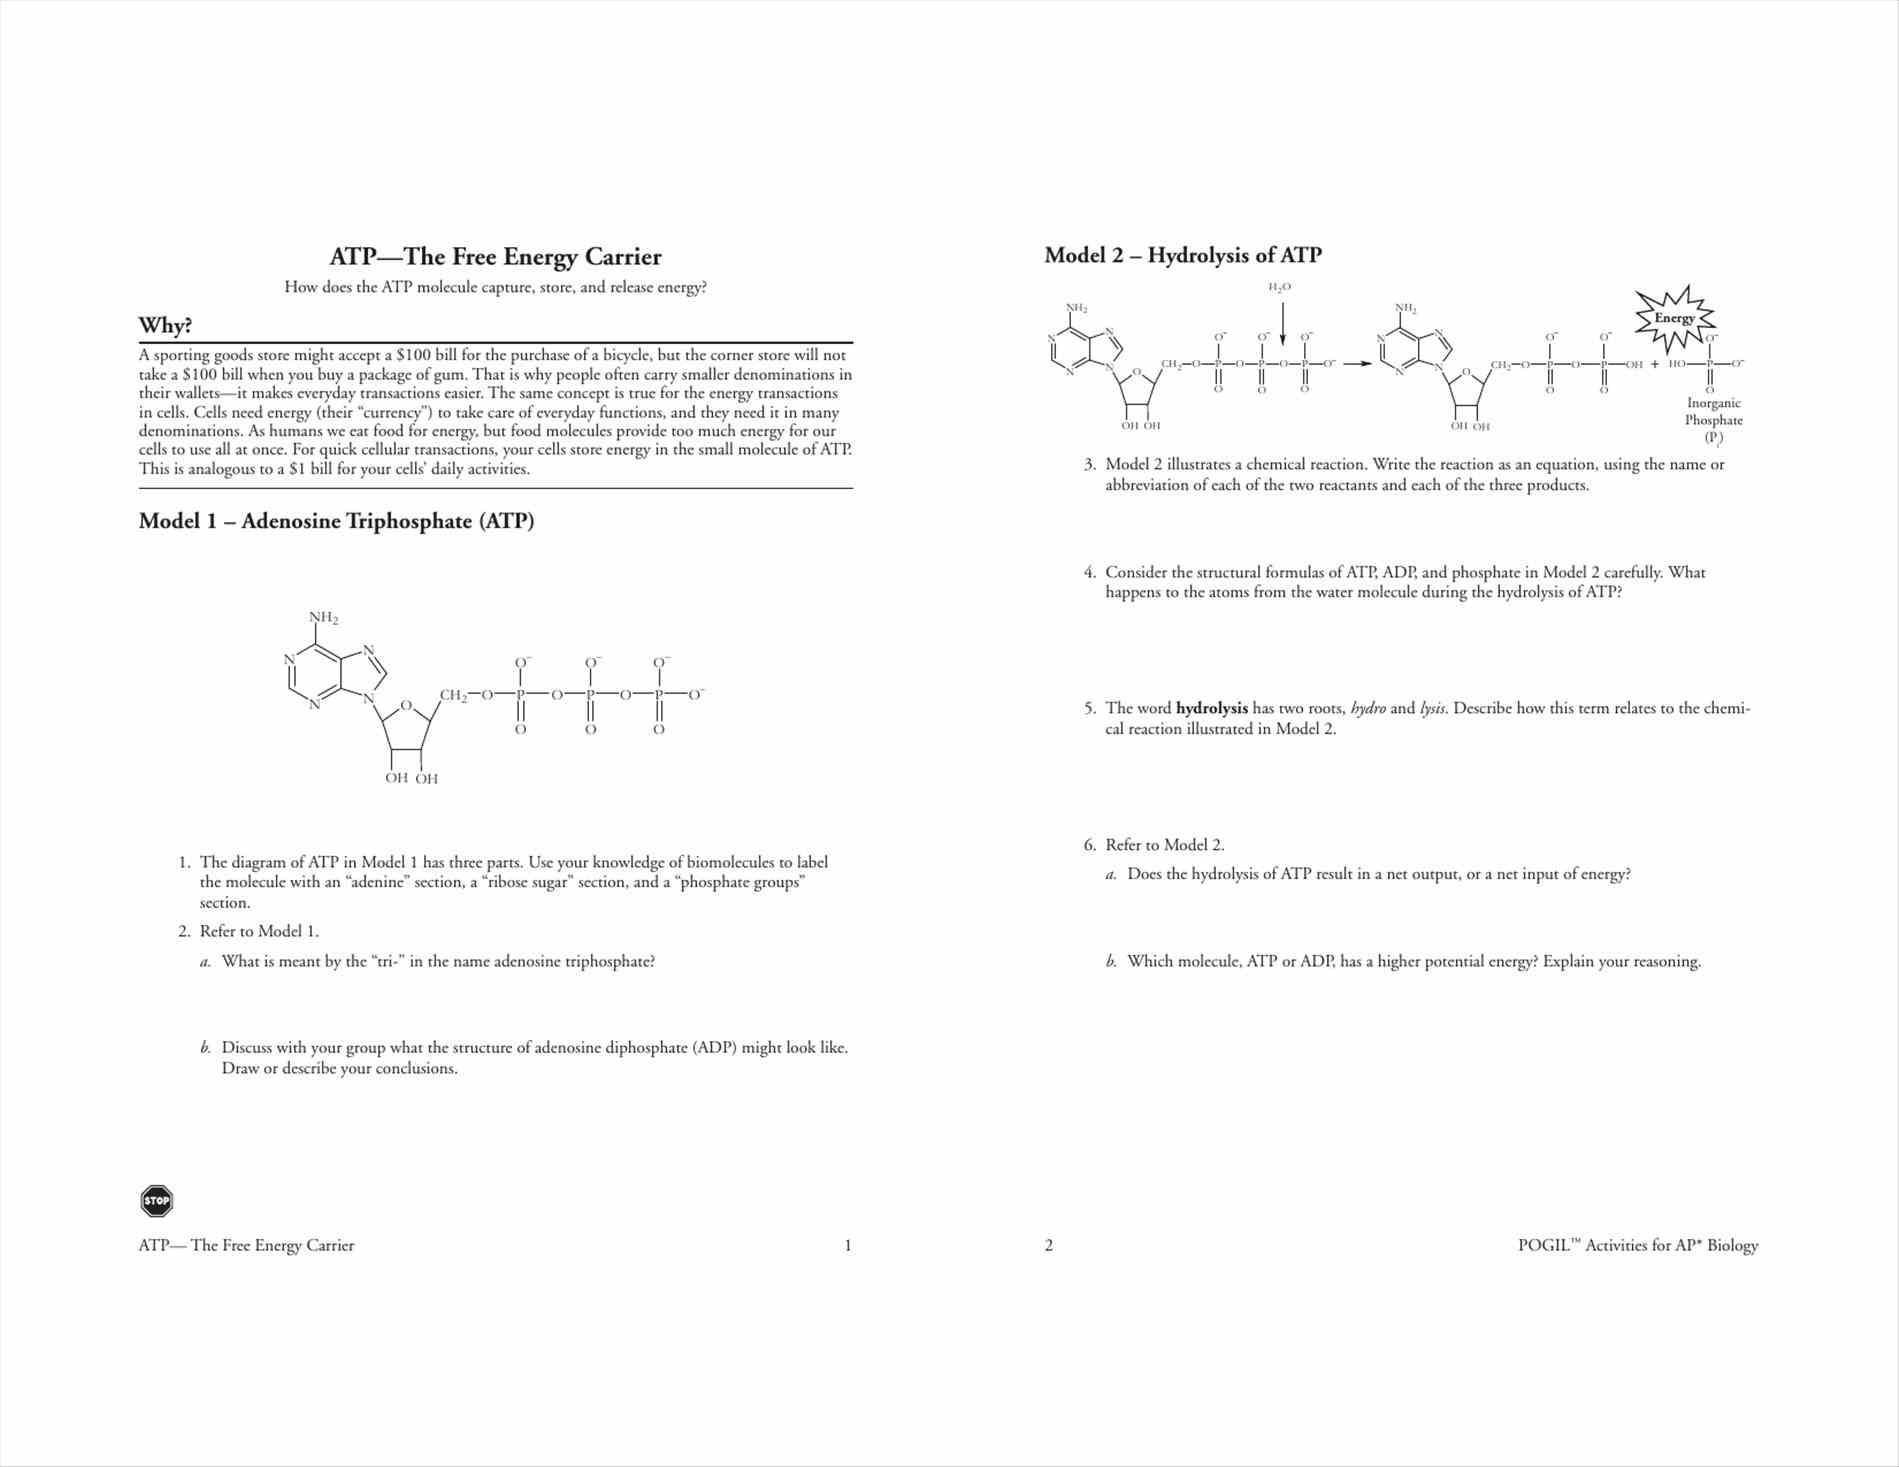 Control Of Gene Expression In Prokaryotes Pogil Worksheet Answers With Regard To Control Of Gene Expression In Prokaryotes Pogil Worksheet Answers